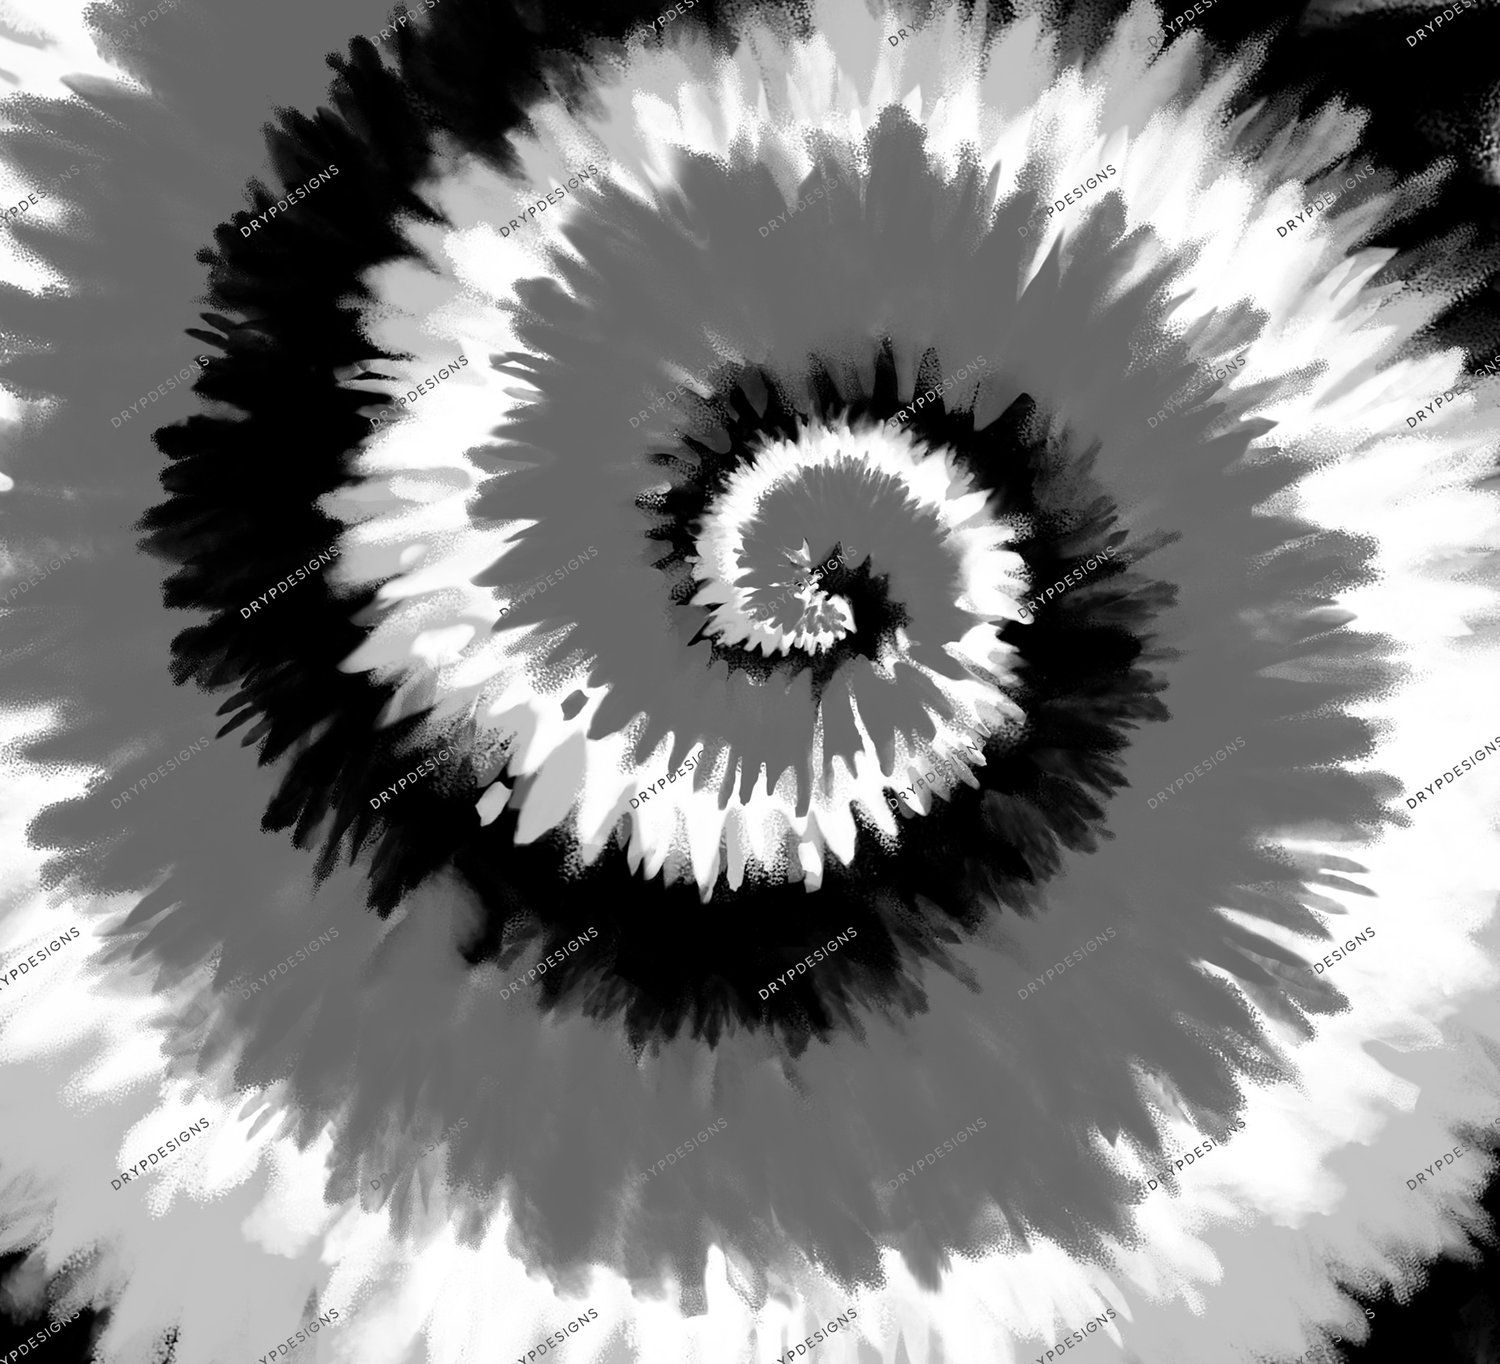 A tie dye black and white spiral - Black and white